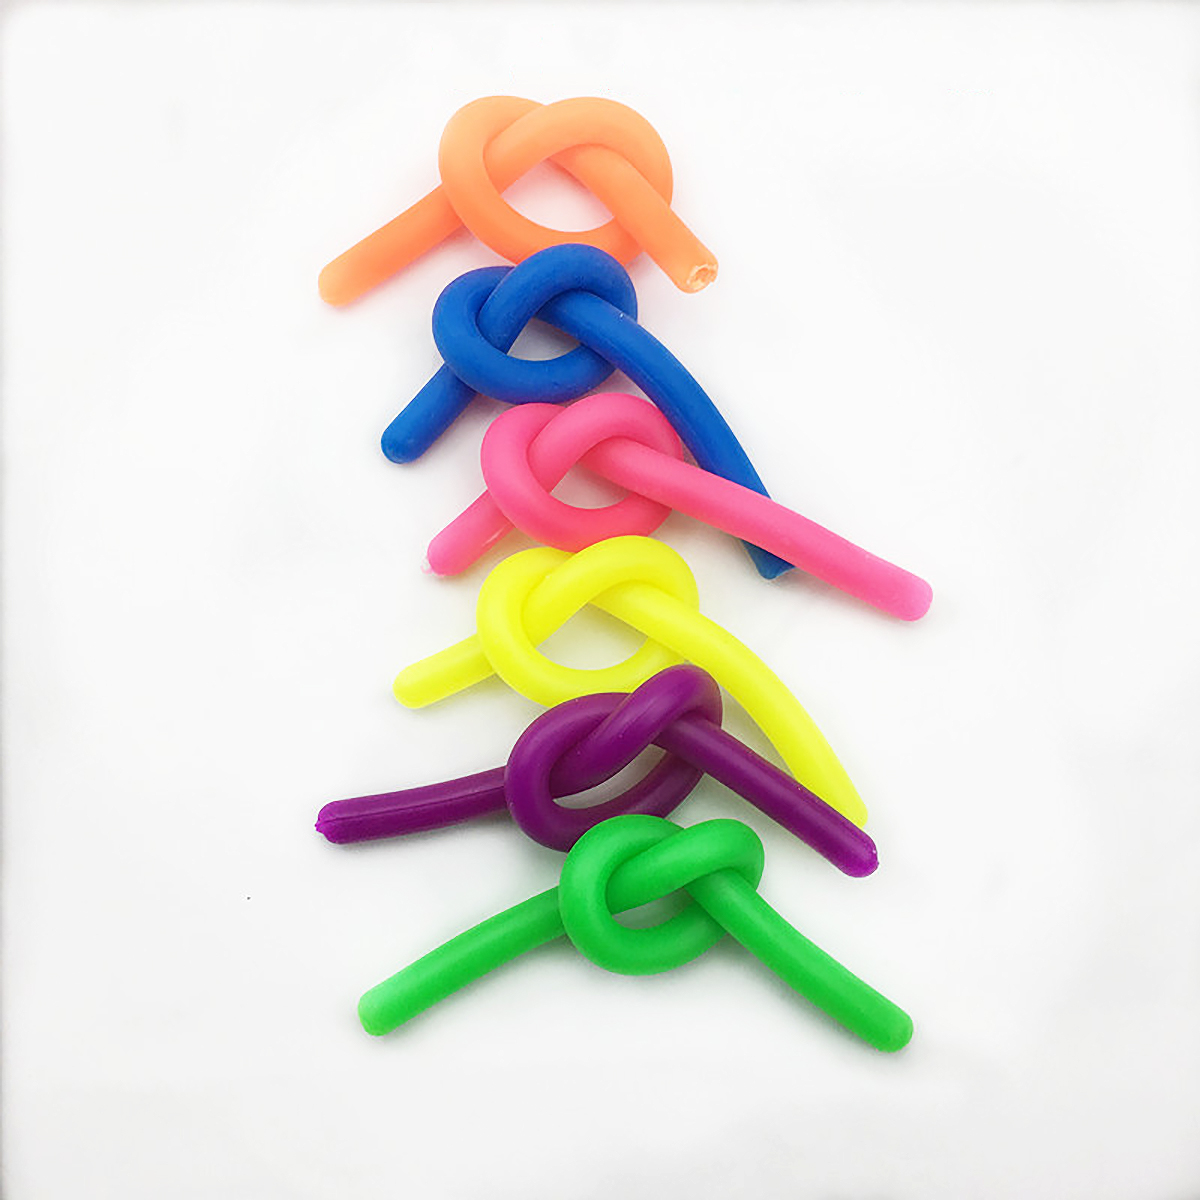 6Pcs-TPR-Colorful-Stretchy-String-Fidget-Gadget-Anxiety-Relief-Reduce-Stress-Gadget-1160180-3